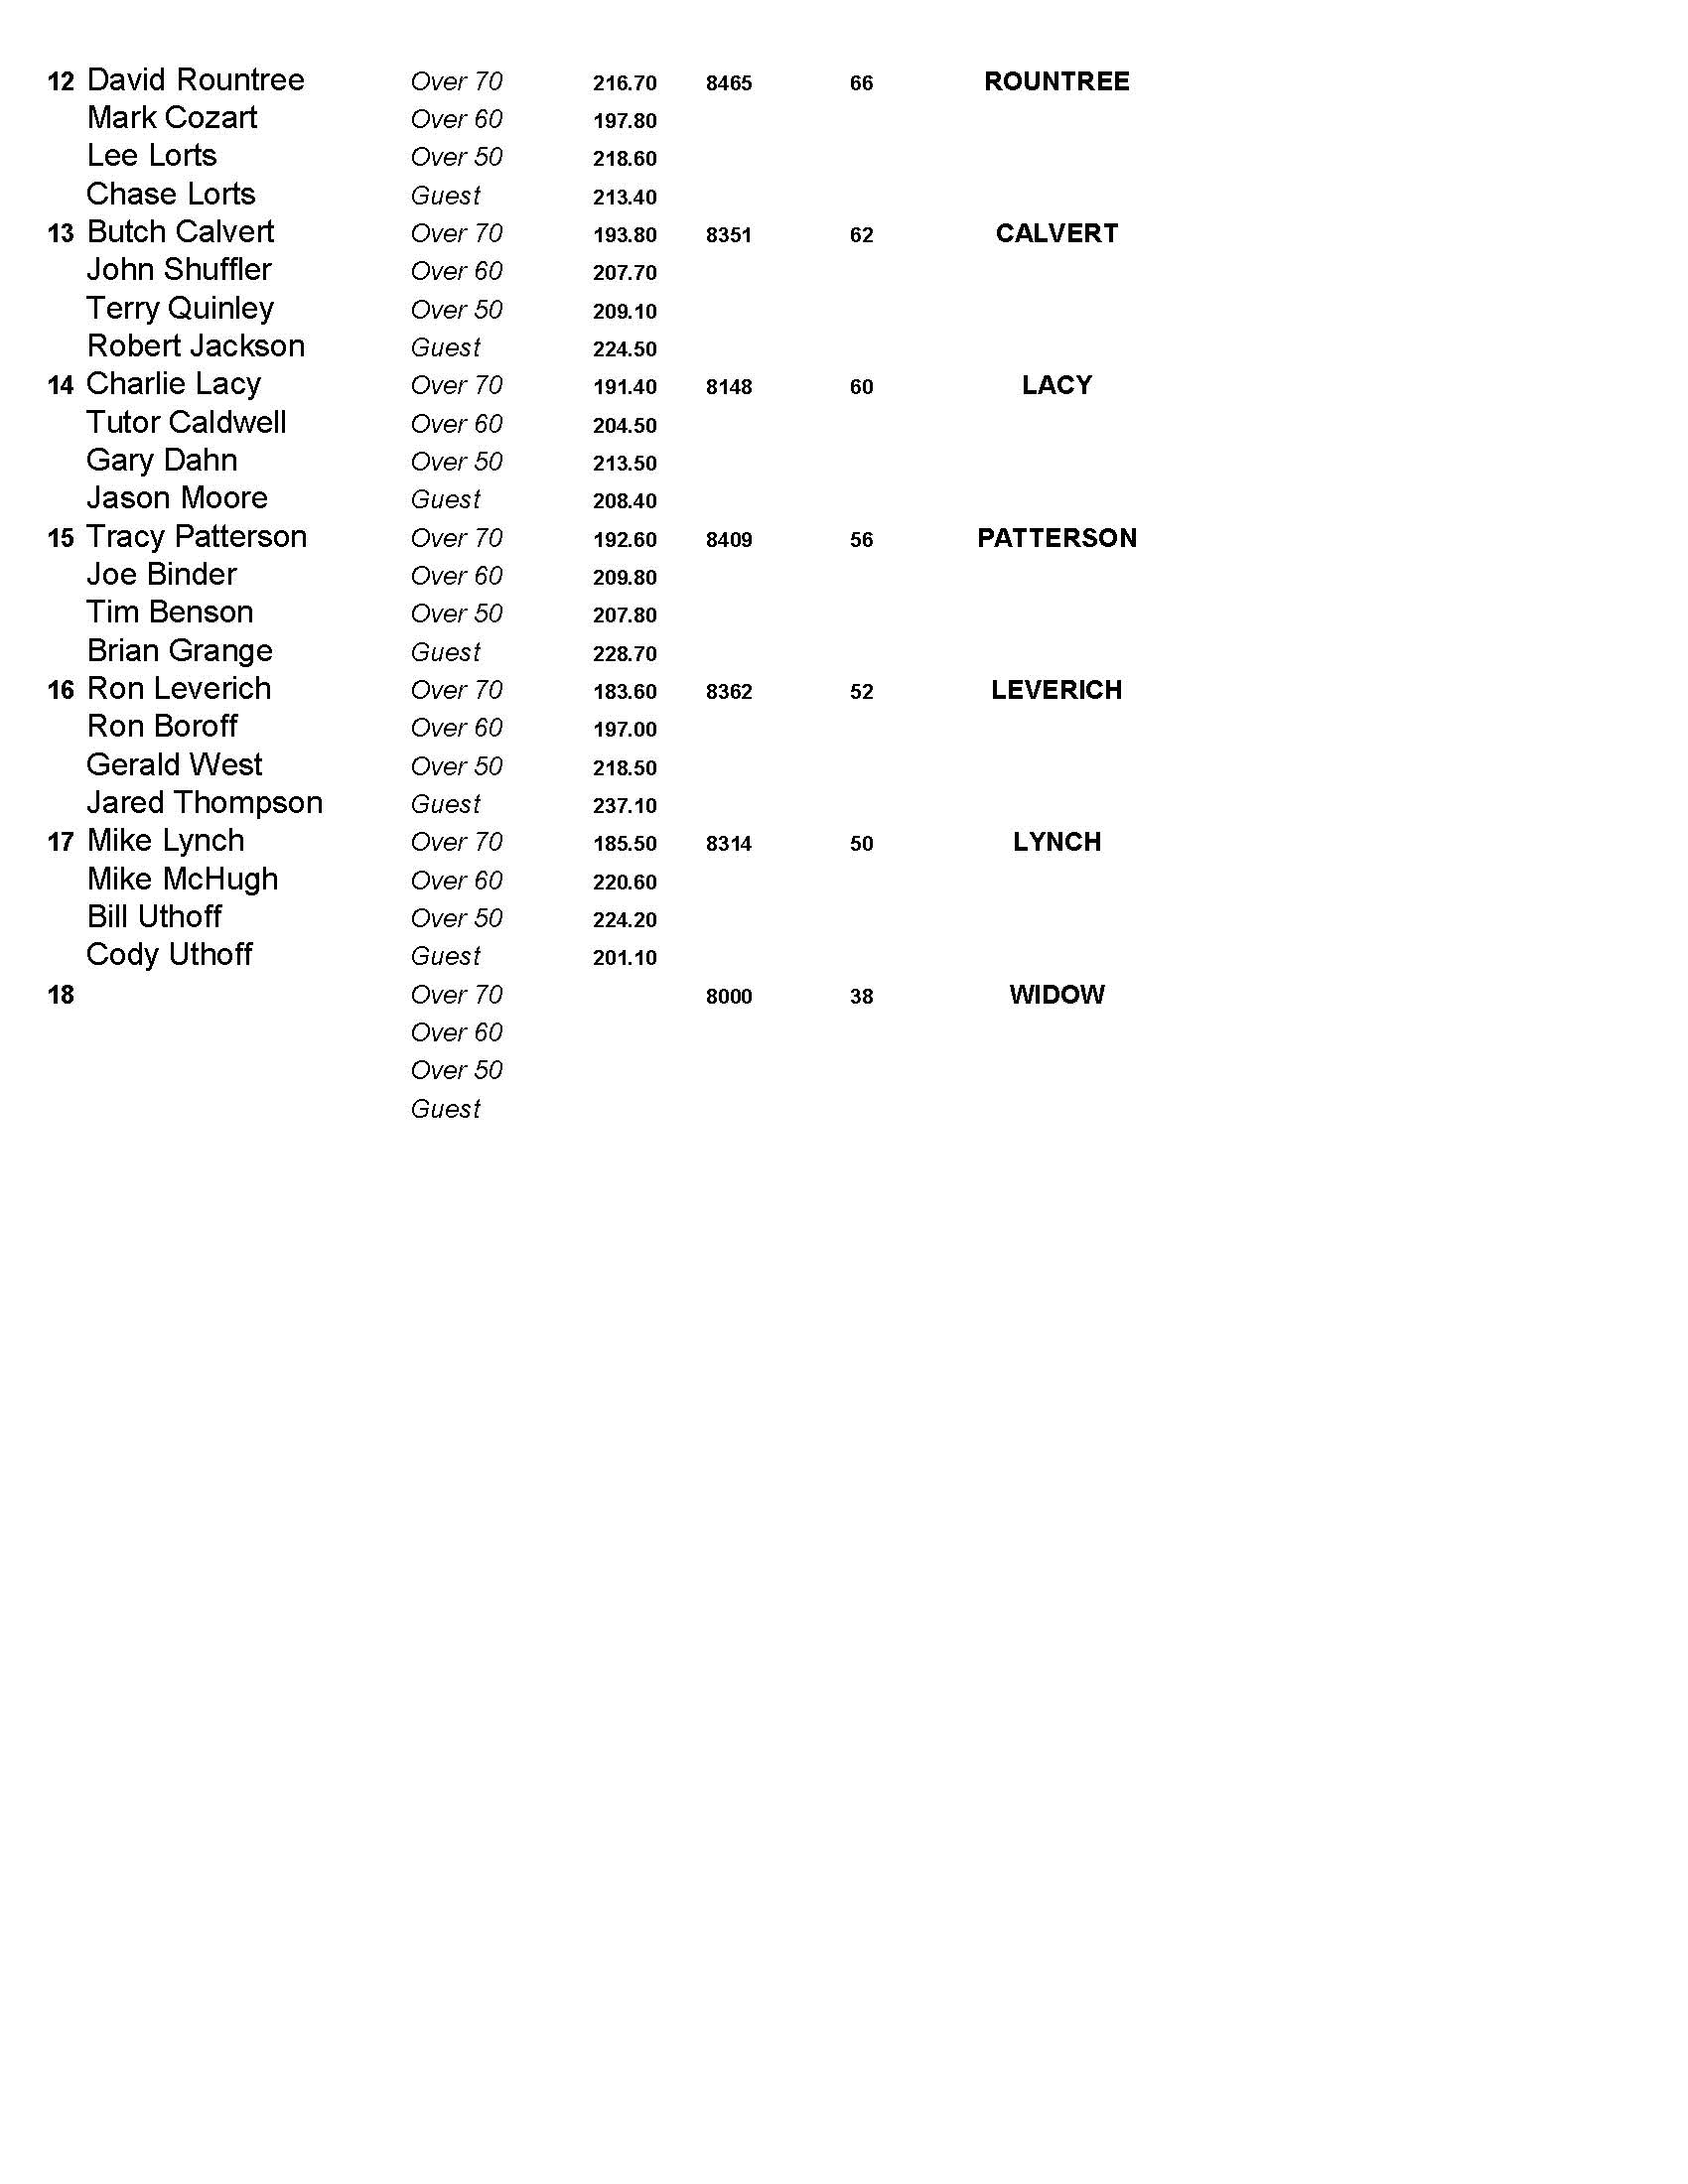 06162019results_Page_2